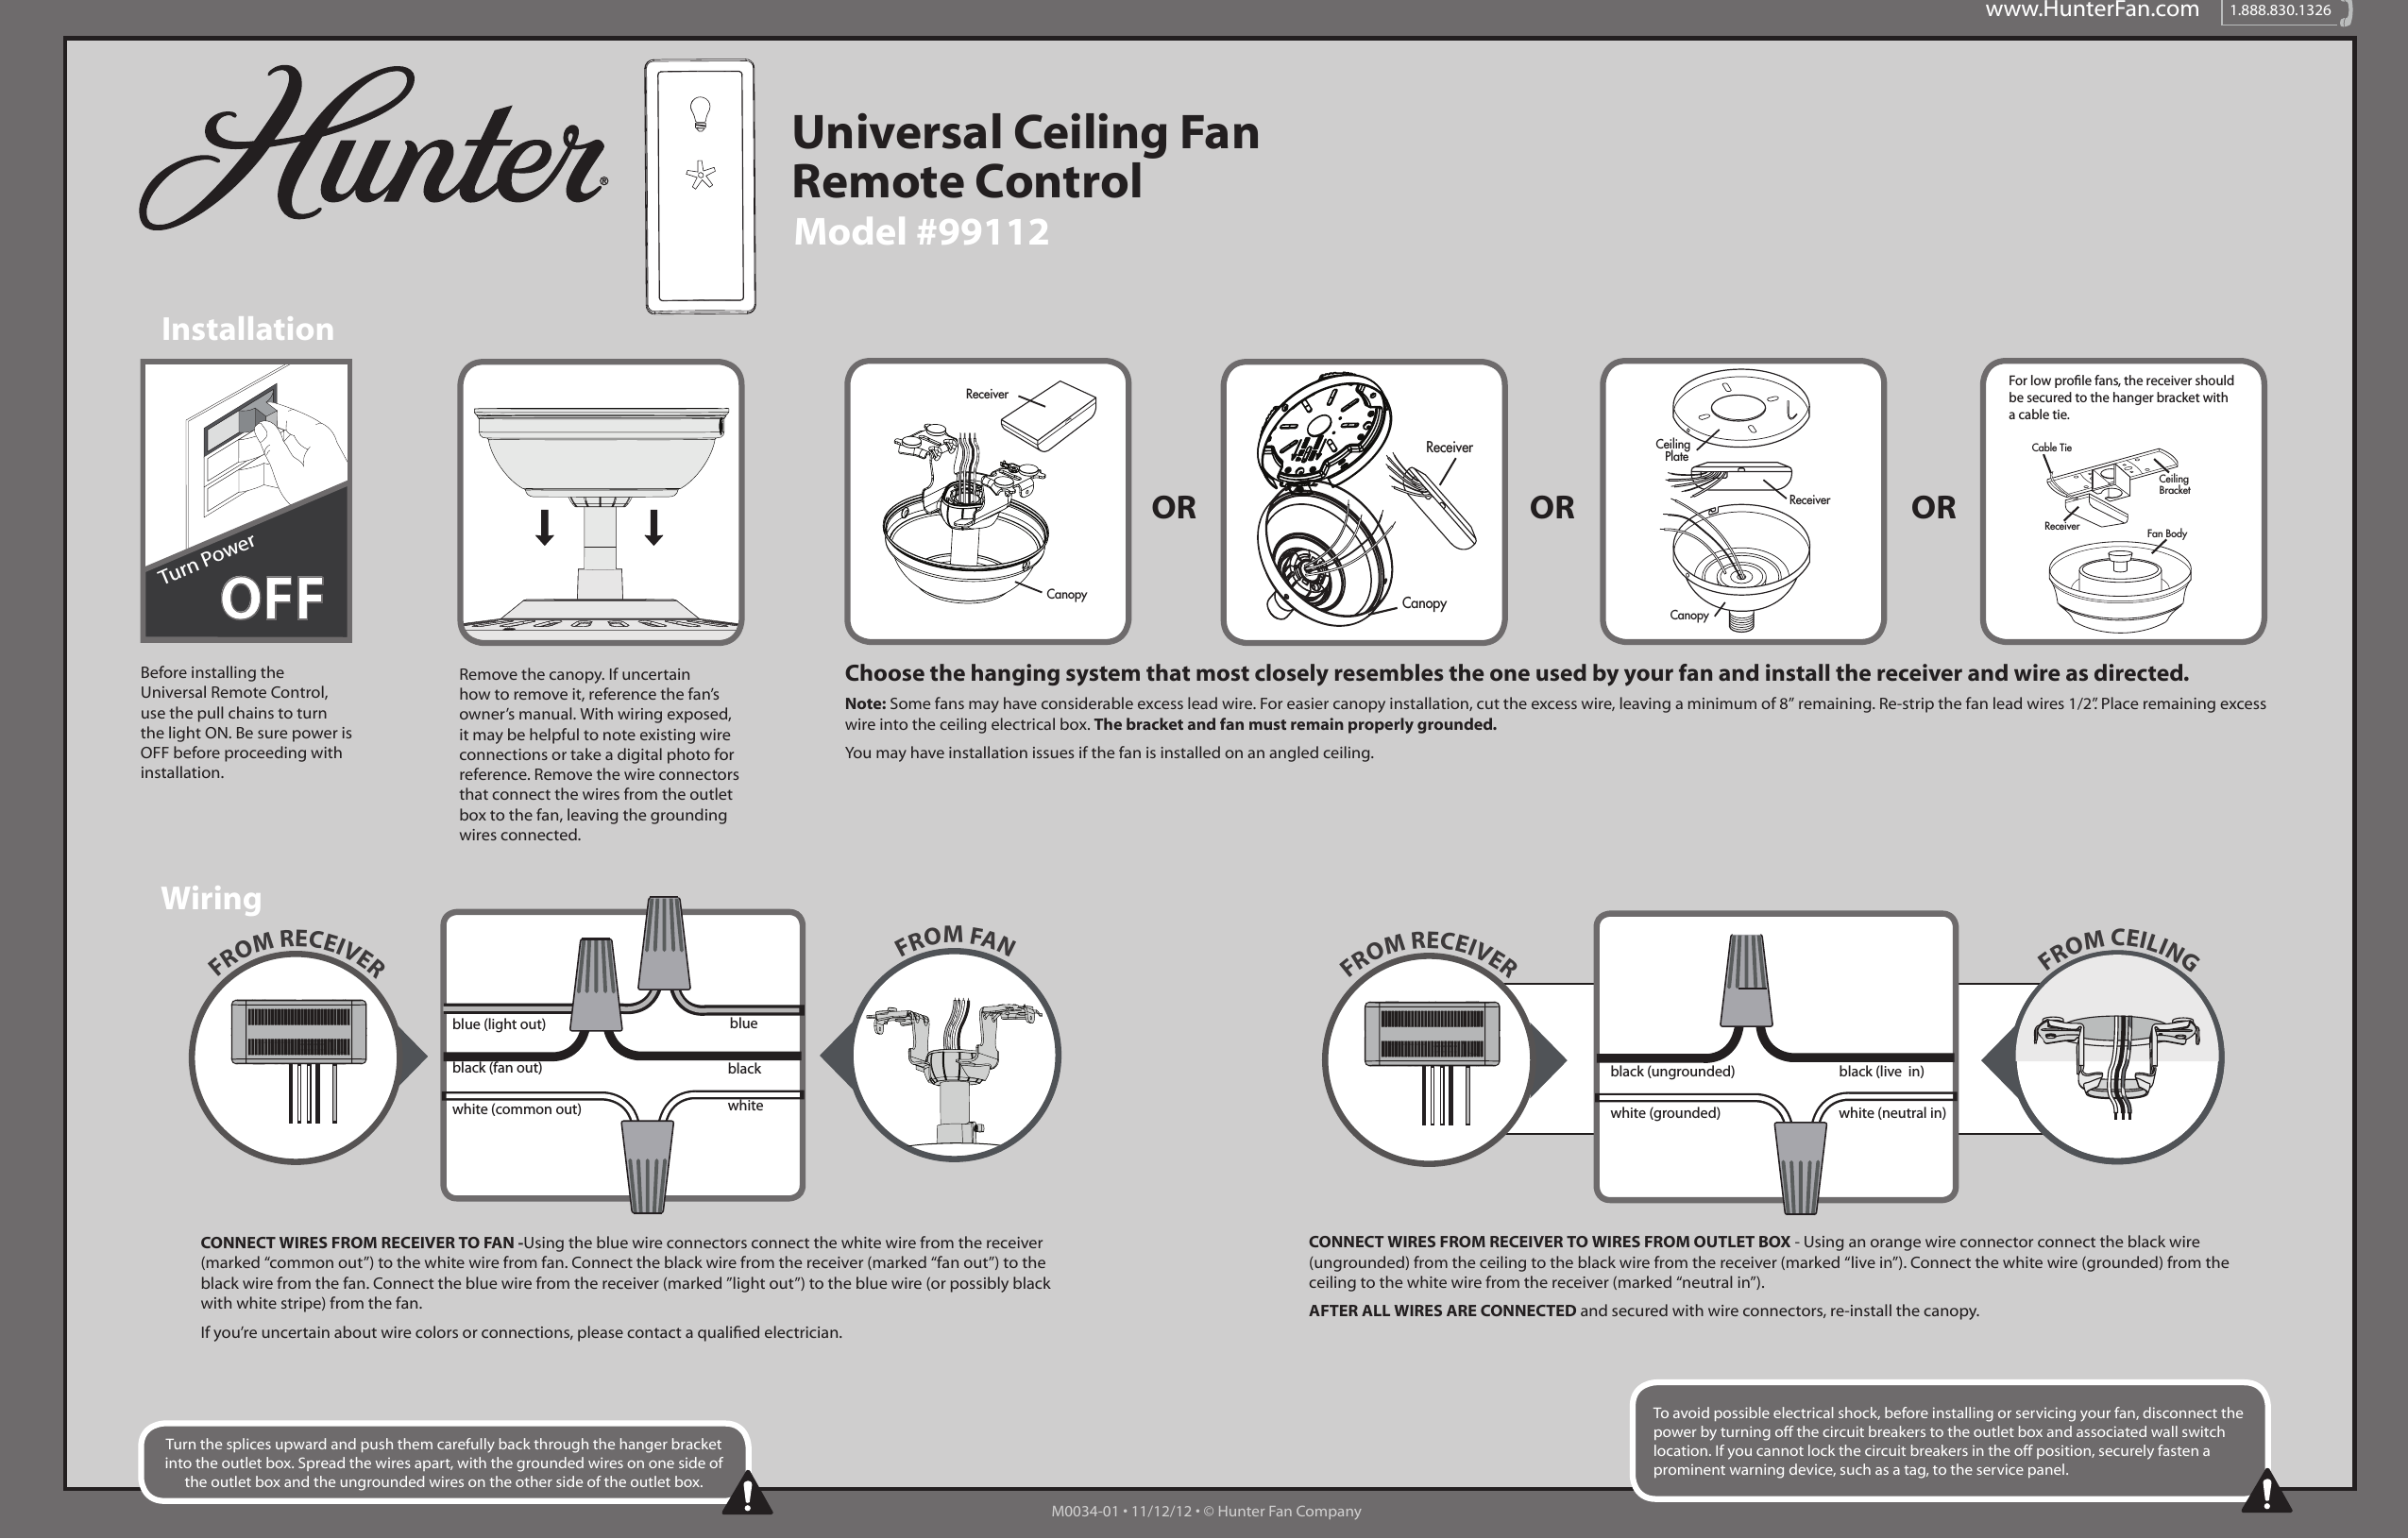 www.HunterFan.com 1.888.830.1326Model #99112Universal Ceiling Fan Remote ControlInstallationWiringOR OR ORRemove the canopy. If uncertain how to remove it, reference the fan’s owner’s manual. With wiring exposed, it may be helpful to note existing wire connections or take a digital photo for reference. Remove the wire connectors that connect the wires from the outlet box to the fan, leaving the grounding wires connected. CONNECT WIRES FROM RECEIVER TO FAN -Using the blue wire connectors connect the white wire from the receiver (marked “common out”) to the white wire from fan. Connect the black wire from the receiver (marked “fan out”) to the black wire from the fan. Connect the blue wire from the receiver (marked ”light out”) to the blue wire (or possibly black with white stripe) from the fan. If you’re uncertain about wire colors or connections, please contact a qualied electrician.CONNECT WIRES FROM RECEIVER TO WIRES FROM OUTLET BOX - Using an orange wire connector connect the black wire (ungrounded) from the ceiling to the black wire from the receiver (marked “live in”). Connect the white wire (grounded) from the ceiling to the white wire from the receiver (marked “neutral in”). AFTER ALL WIRES ARE CONNECTED and secured with wire connectors, re-install the canopy. Before installing the Universal Remote Control, use the pull chains to turn the light ON. Be sure power is OFF before proceeding with installation.Choose the hanging system that most closely resembles the one used by your fan and install the receiver and wire as directed. Note: Some fans may have considerable excess lead wire. For easier canopy installation, cut the excess wire, leaving a minimum of 8” remaining. Re-strip the fan lead wires 1/2”. Place remaining excess wire into the ceiling electrical box. The bracket and fan must remain properly grounded.  You may have installation issues if the fan is installed on an angled ceiling.CeilingPlateReceiverCanopyReceiverCanopyCeilingBracketReceiver Fan BodyCable TieFor low prole fans, the receiver should be secured to the hanger bracket with a cable tie.ReceiverCanopyTurn the splices upward and push them carefully back through the hanger bracket into the outlet box. Spread the wires apart, with the grounded wires on one side of the outlet box and the ungrounded wires on the other side of the outlet box.To avoid possible electrical shock, before installing or servicing your fan, disconnect the power by turning off the circuit breakers to the outlet box and associated wall switch location. If you cannot lock the circuit breakers in the off position, securely fasten a prominent warning device, such as a tag, to the service panel.FROM RECEIVER FROM CEILINGblack (ungrounded)white (grounded) white (neutral in)black (live  in)FROM RECEIVERwhiteblackbluewhite (common out)black (fan out)blue (light out)FROM FANM0034-01 • 11/12/12 • © Hunter Fan CompanyOFFTurn Power